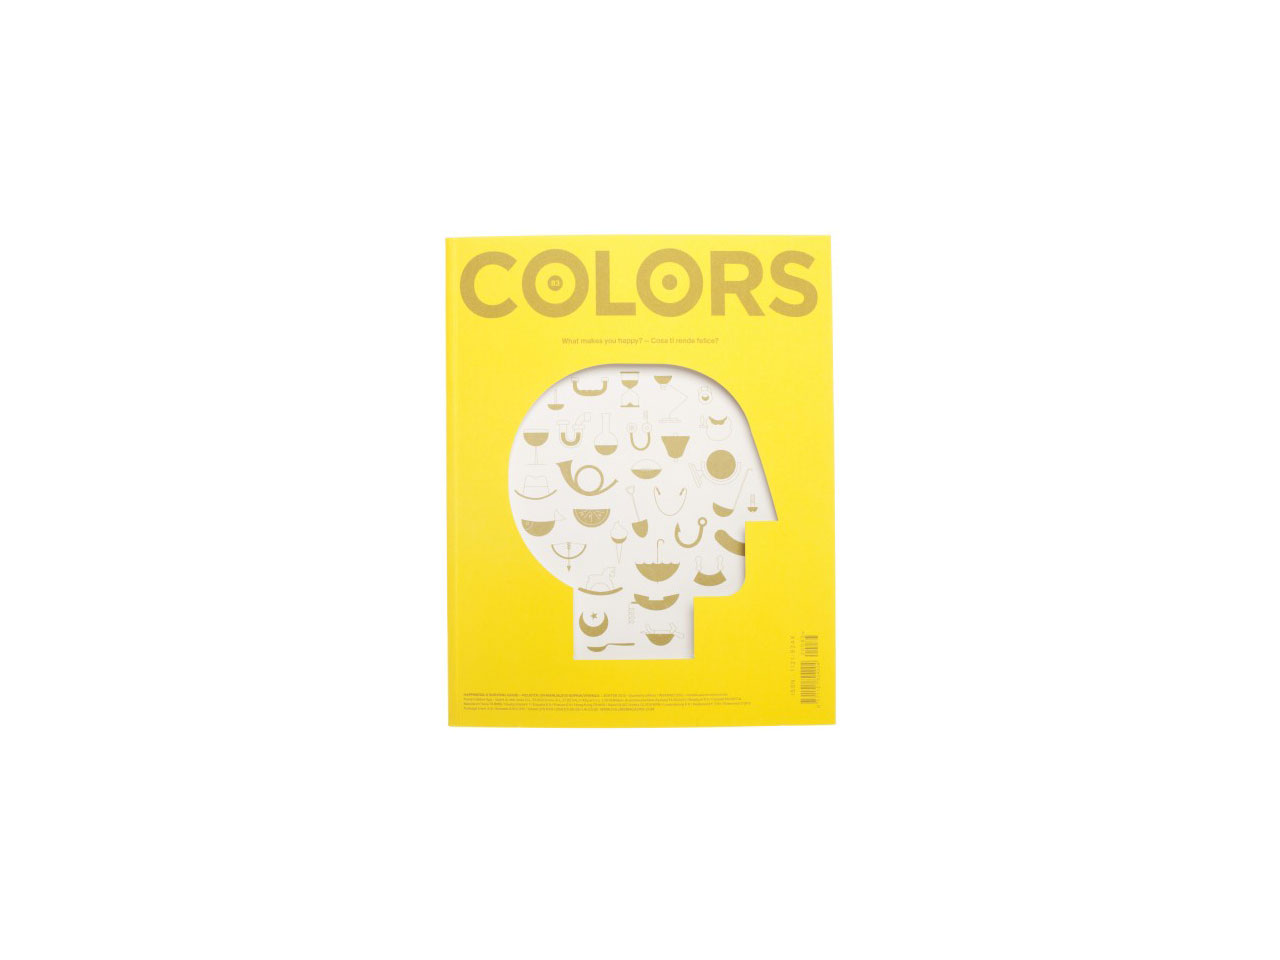 COLORS 83: Happiness – IdN Proshop